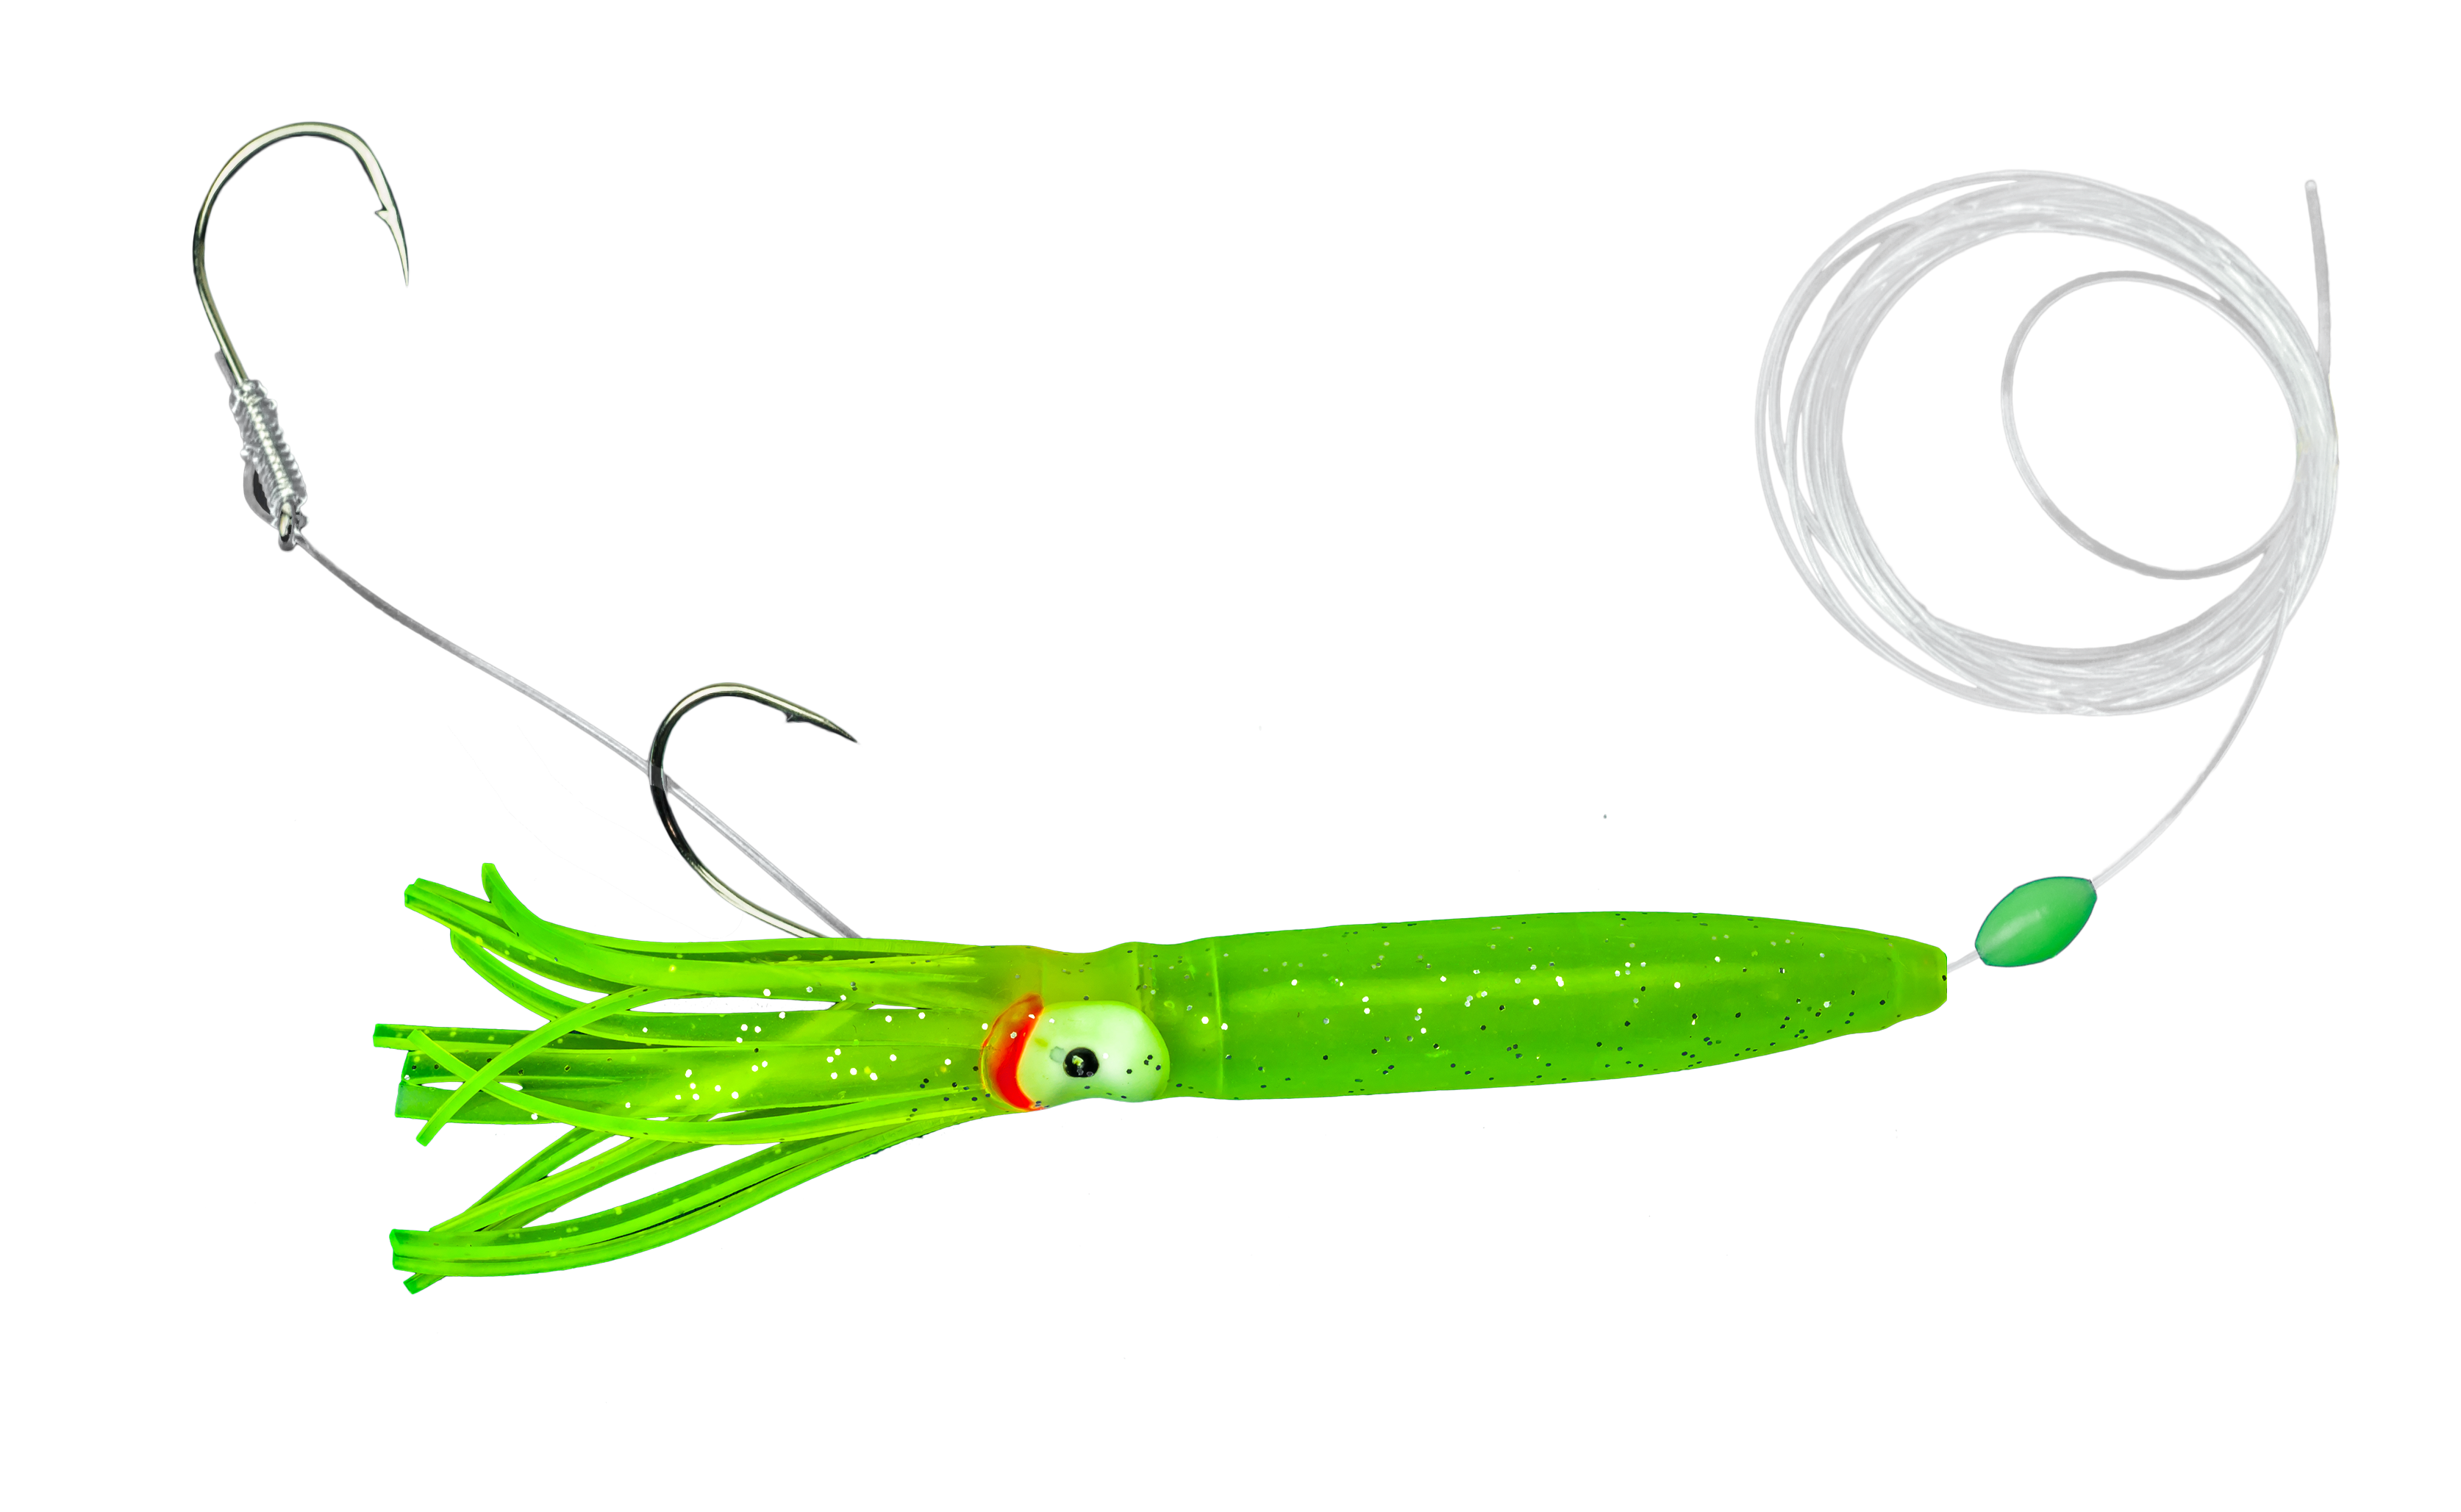 YUCONG 1PC Soft Squid Bait 12.5cm-10g Silicone Octopus Fishing